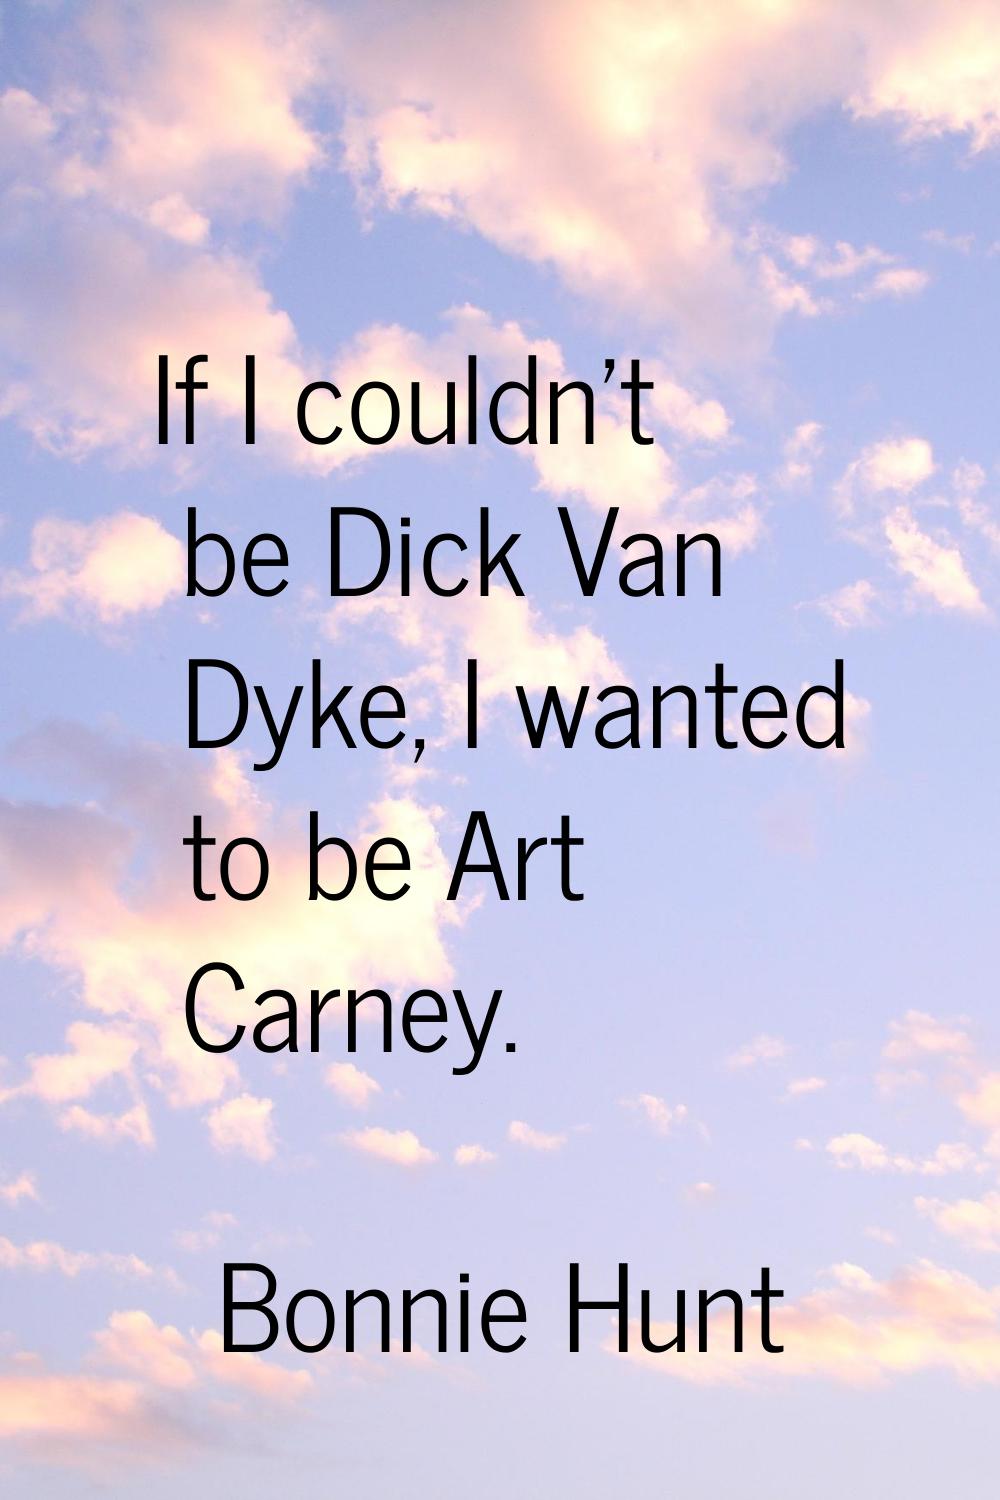 If I couldn't be Dick Van Dyke, I wanted to be Art Carney.